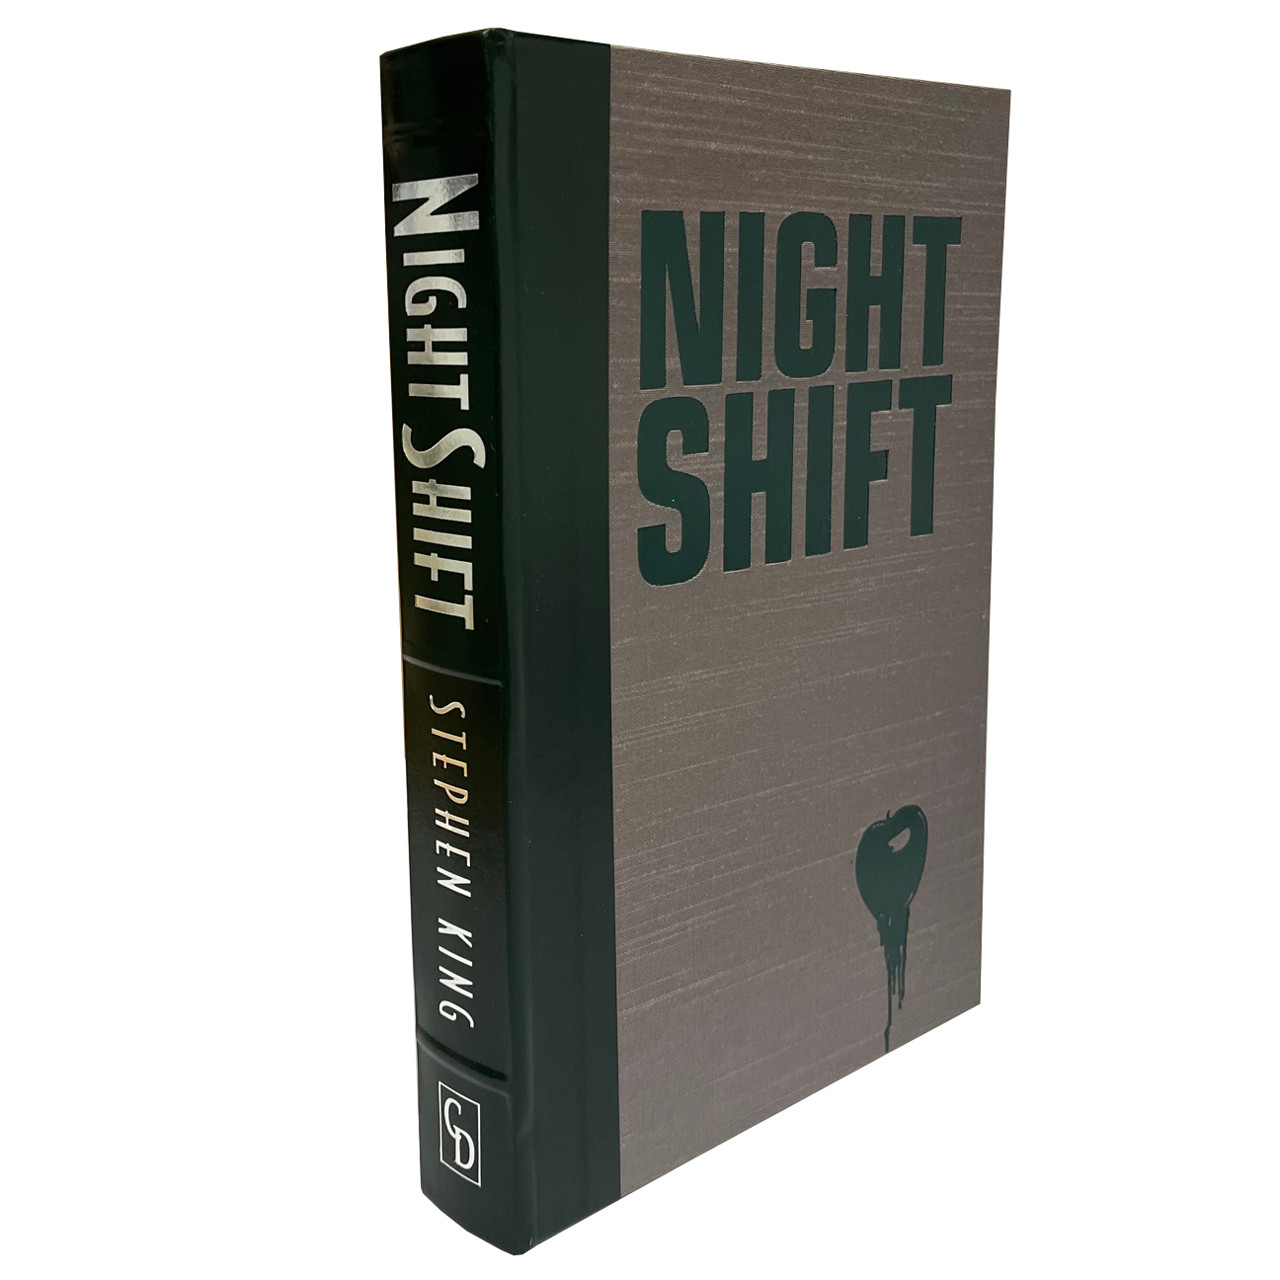 Stephen King, The Doubleday Years "Night Shift" Signed Lettered Artist Edition "WW" of 52, Remarqued by Glenn Chadbourne [Very Fine]